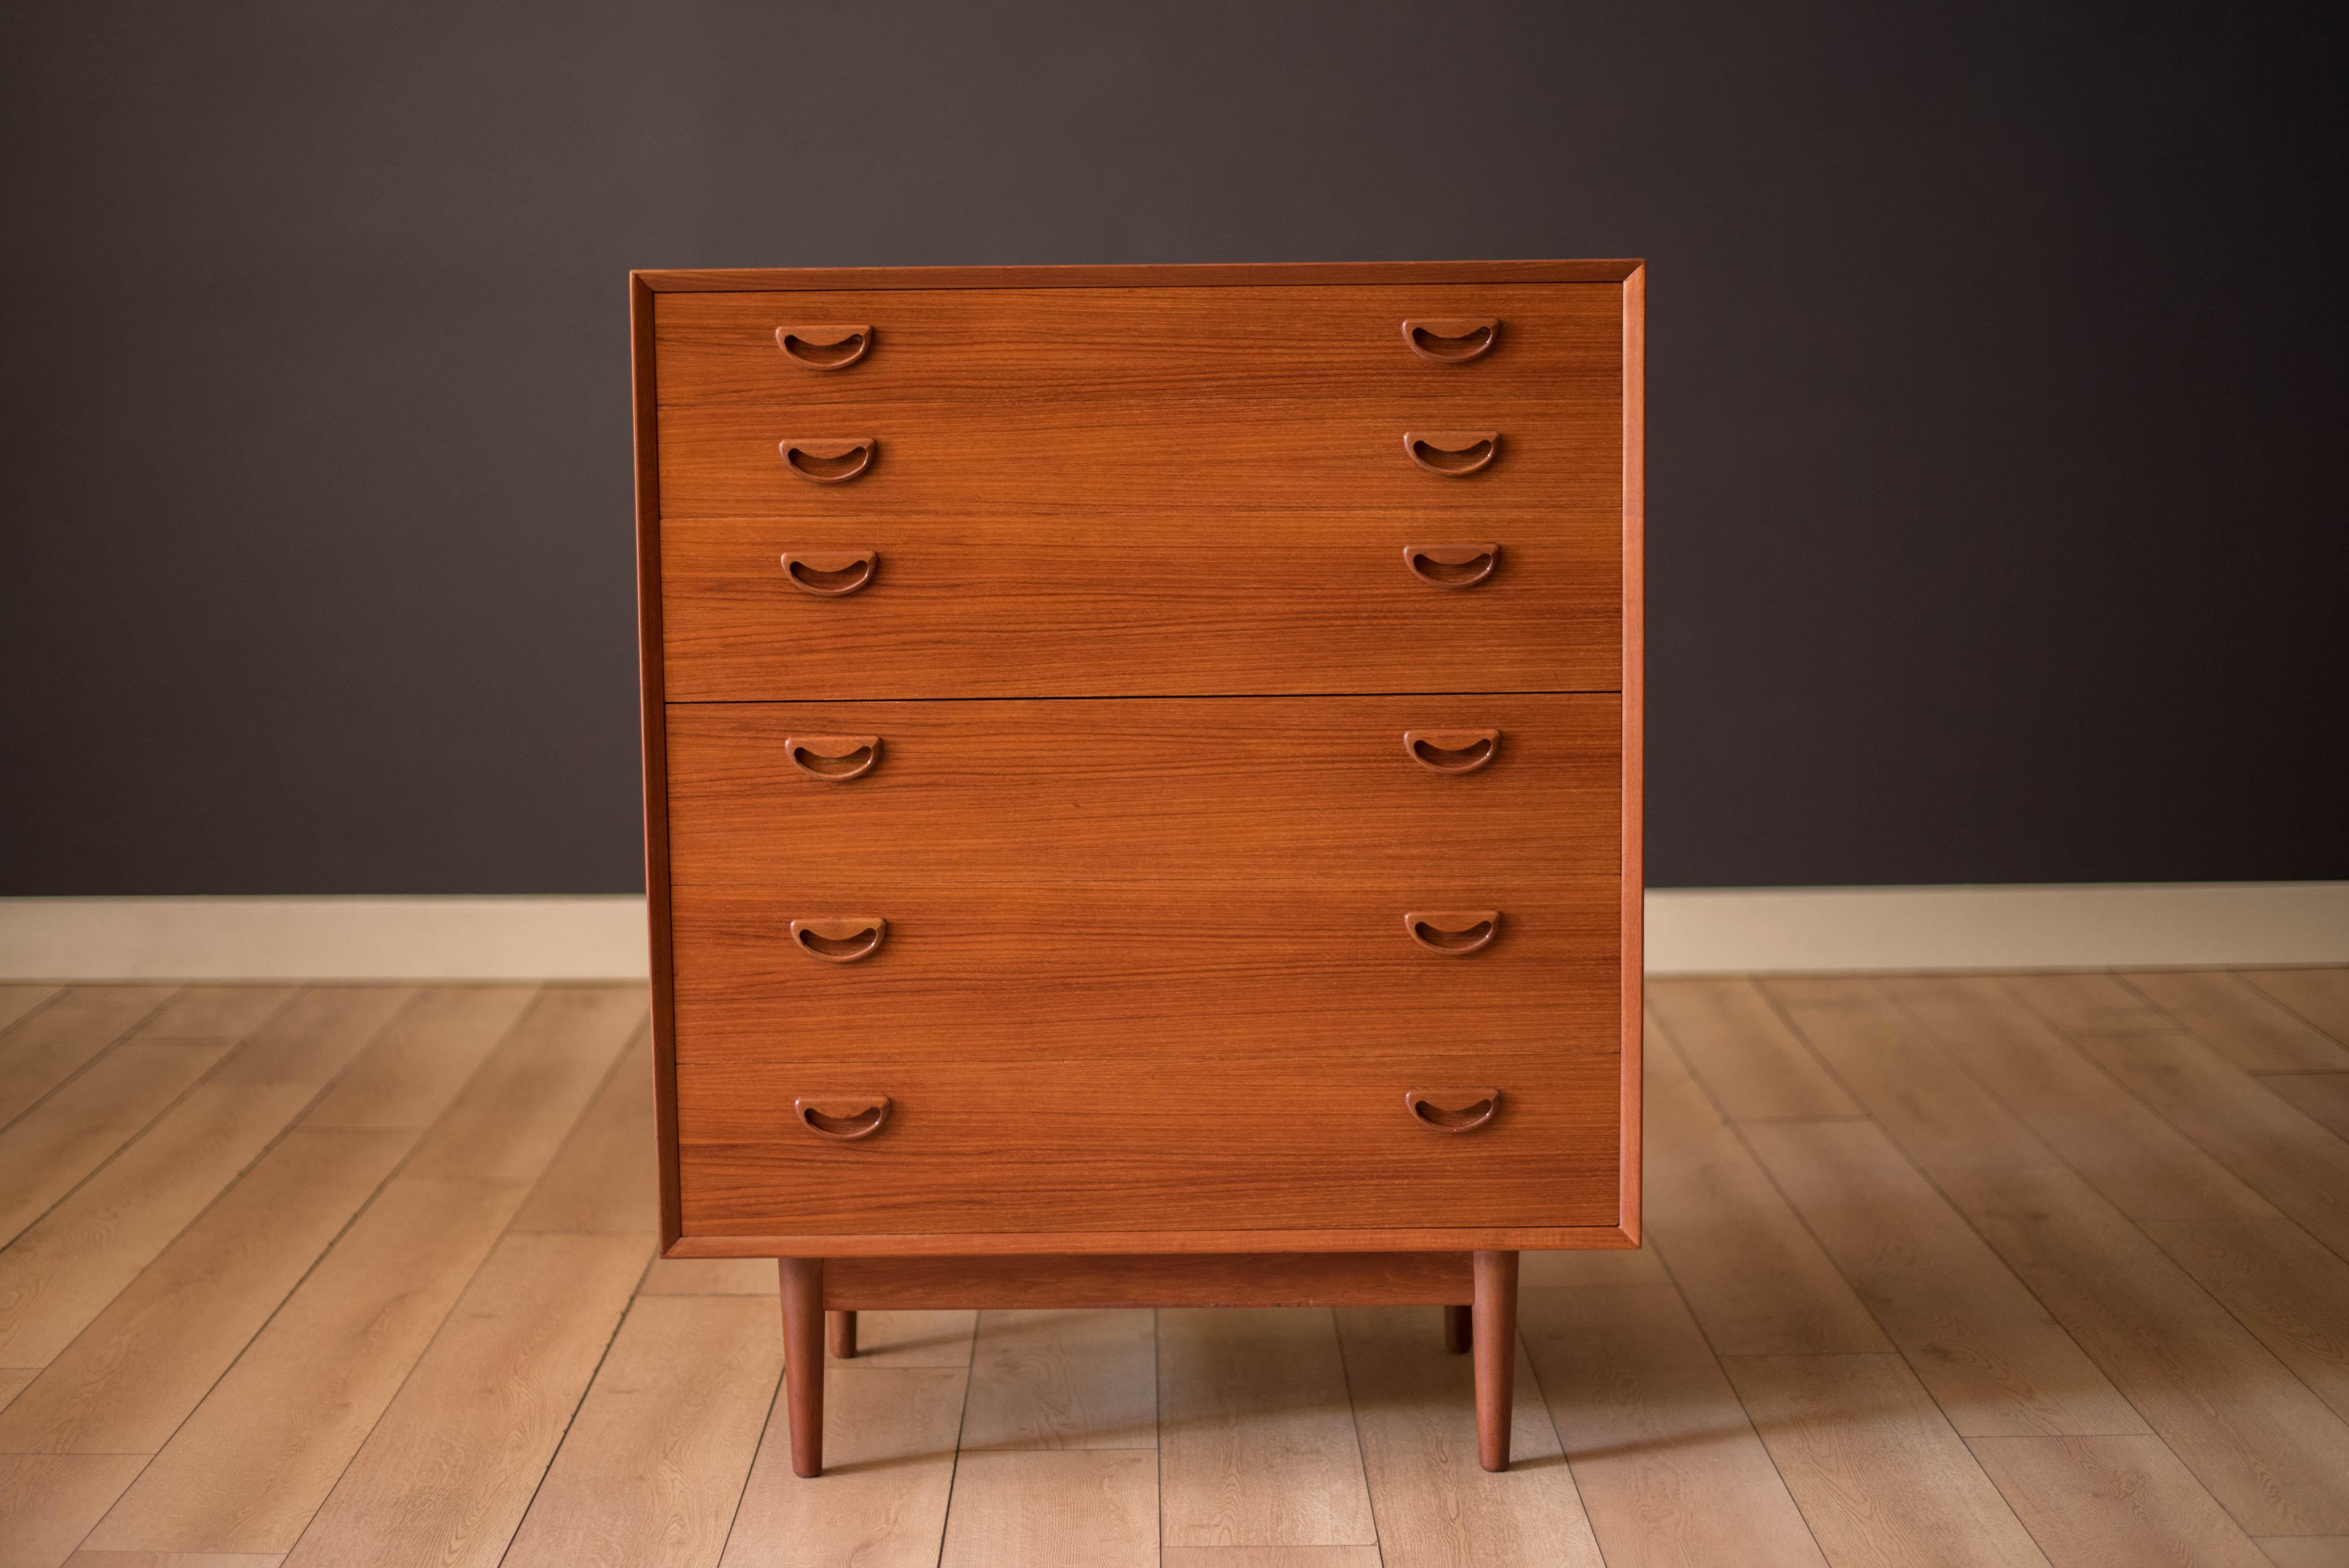 Mid century modern highboy dresser in teak circa 1960's. Features solid wood sculptural handles and natural bookmatched grains. Offers plenty of storage space equipped with six drawers. Matching double lowboy dresser available in separate listing. 